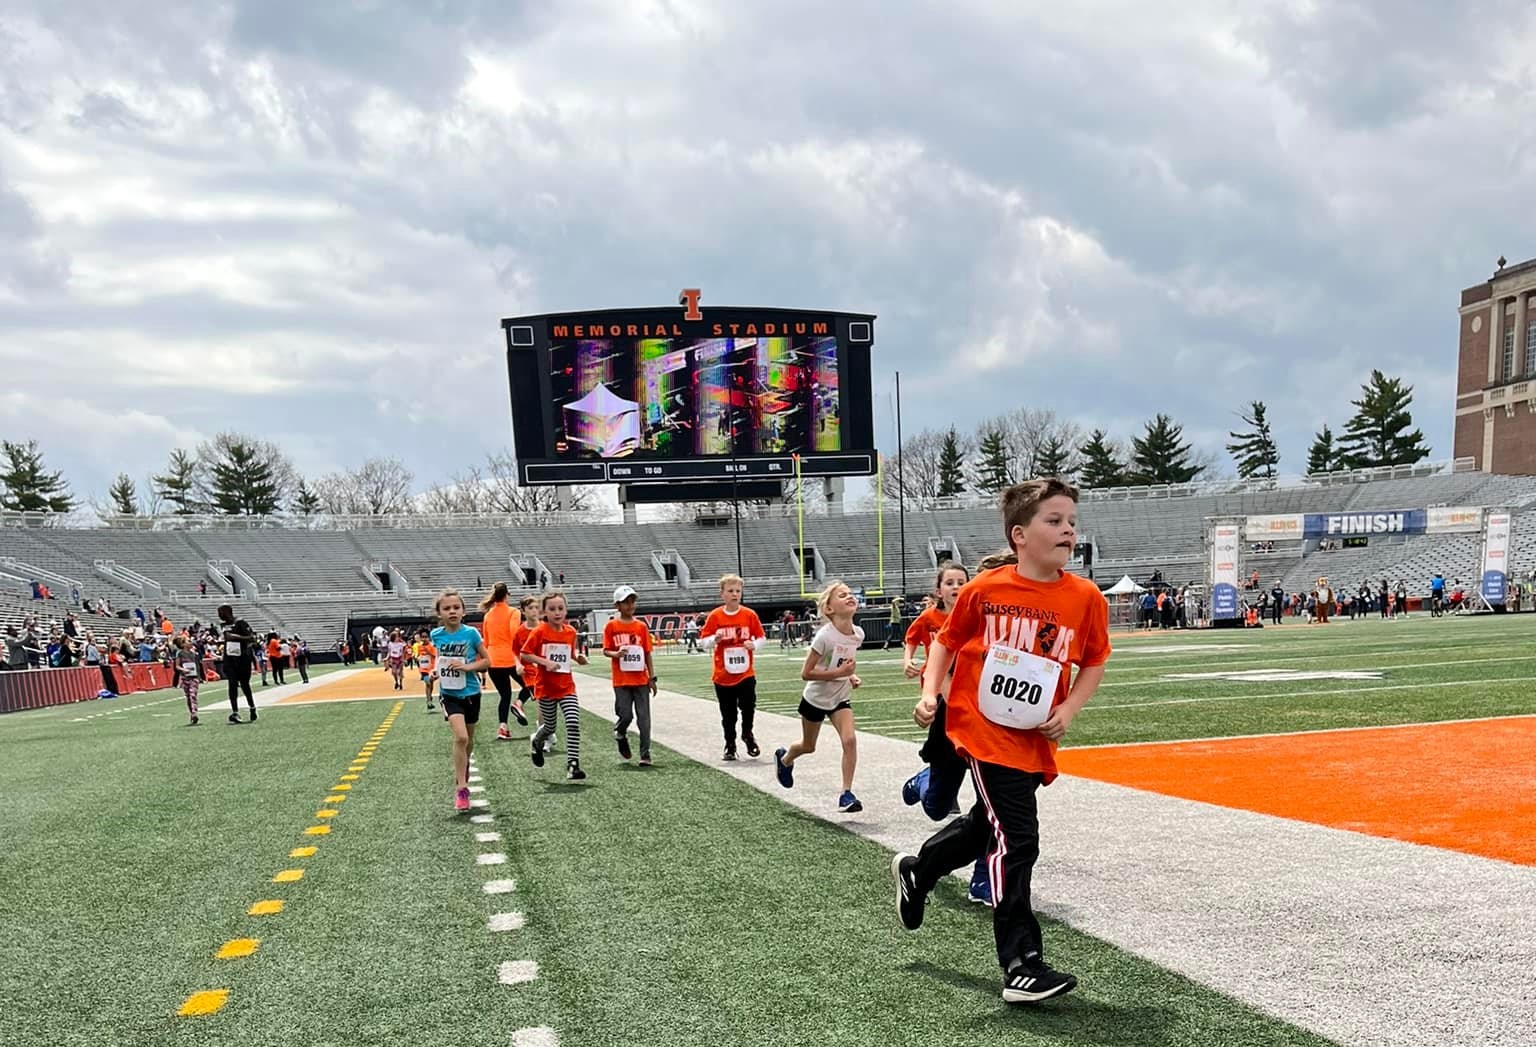 Several children in orange t-shirts are running along the sideline of a football field.